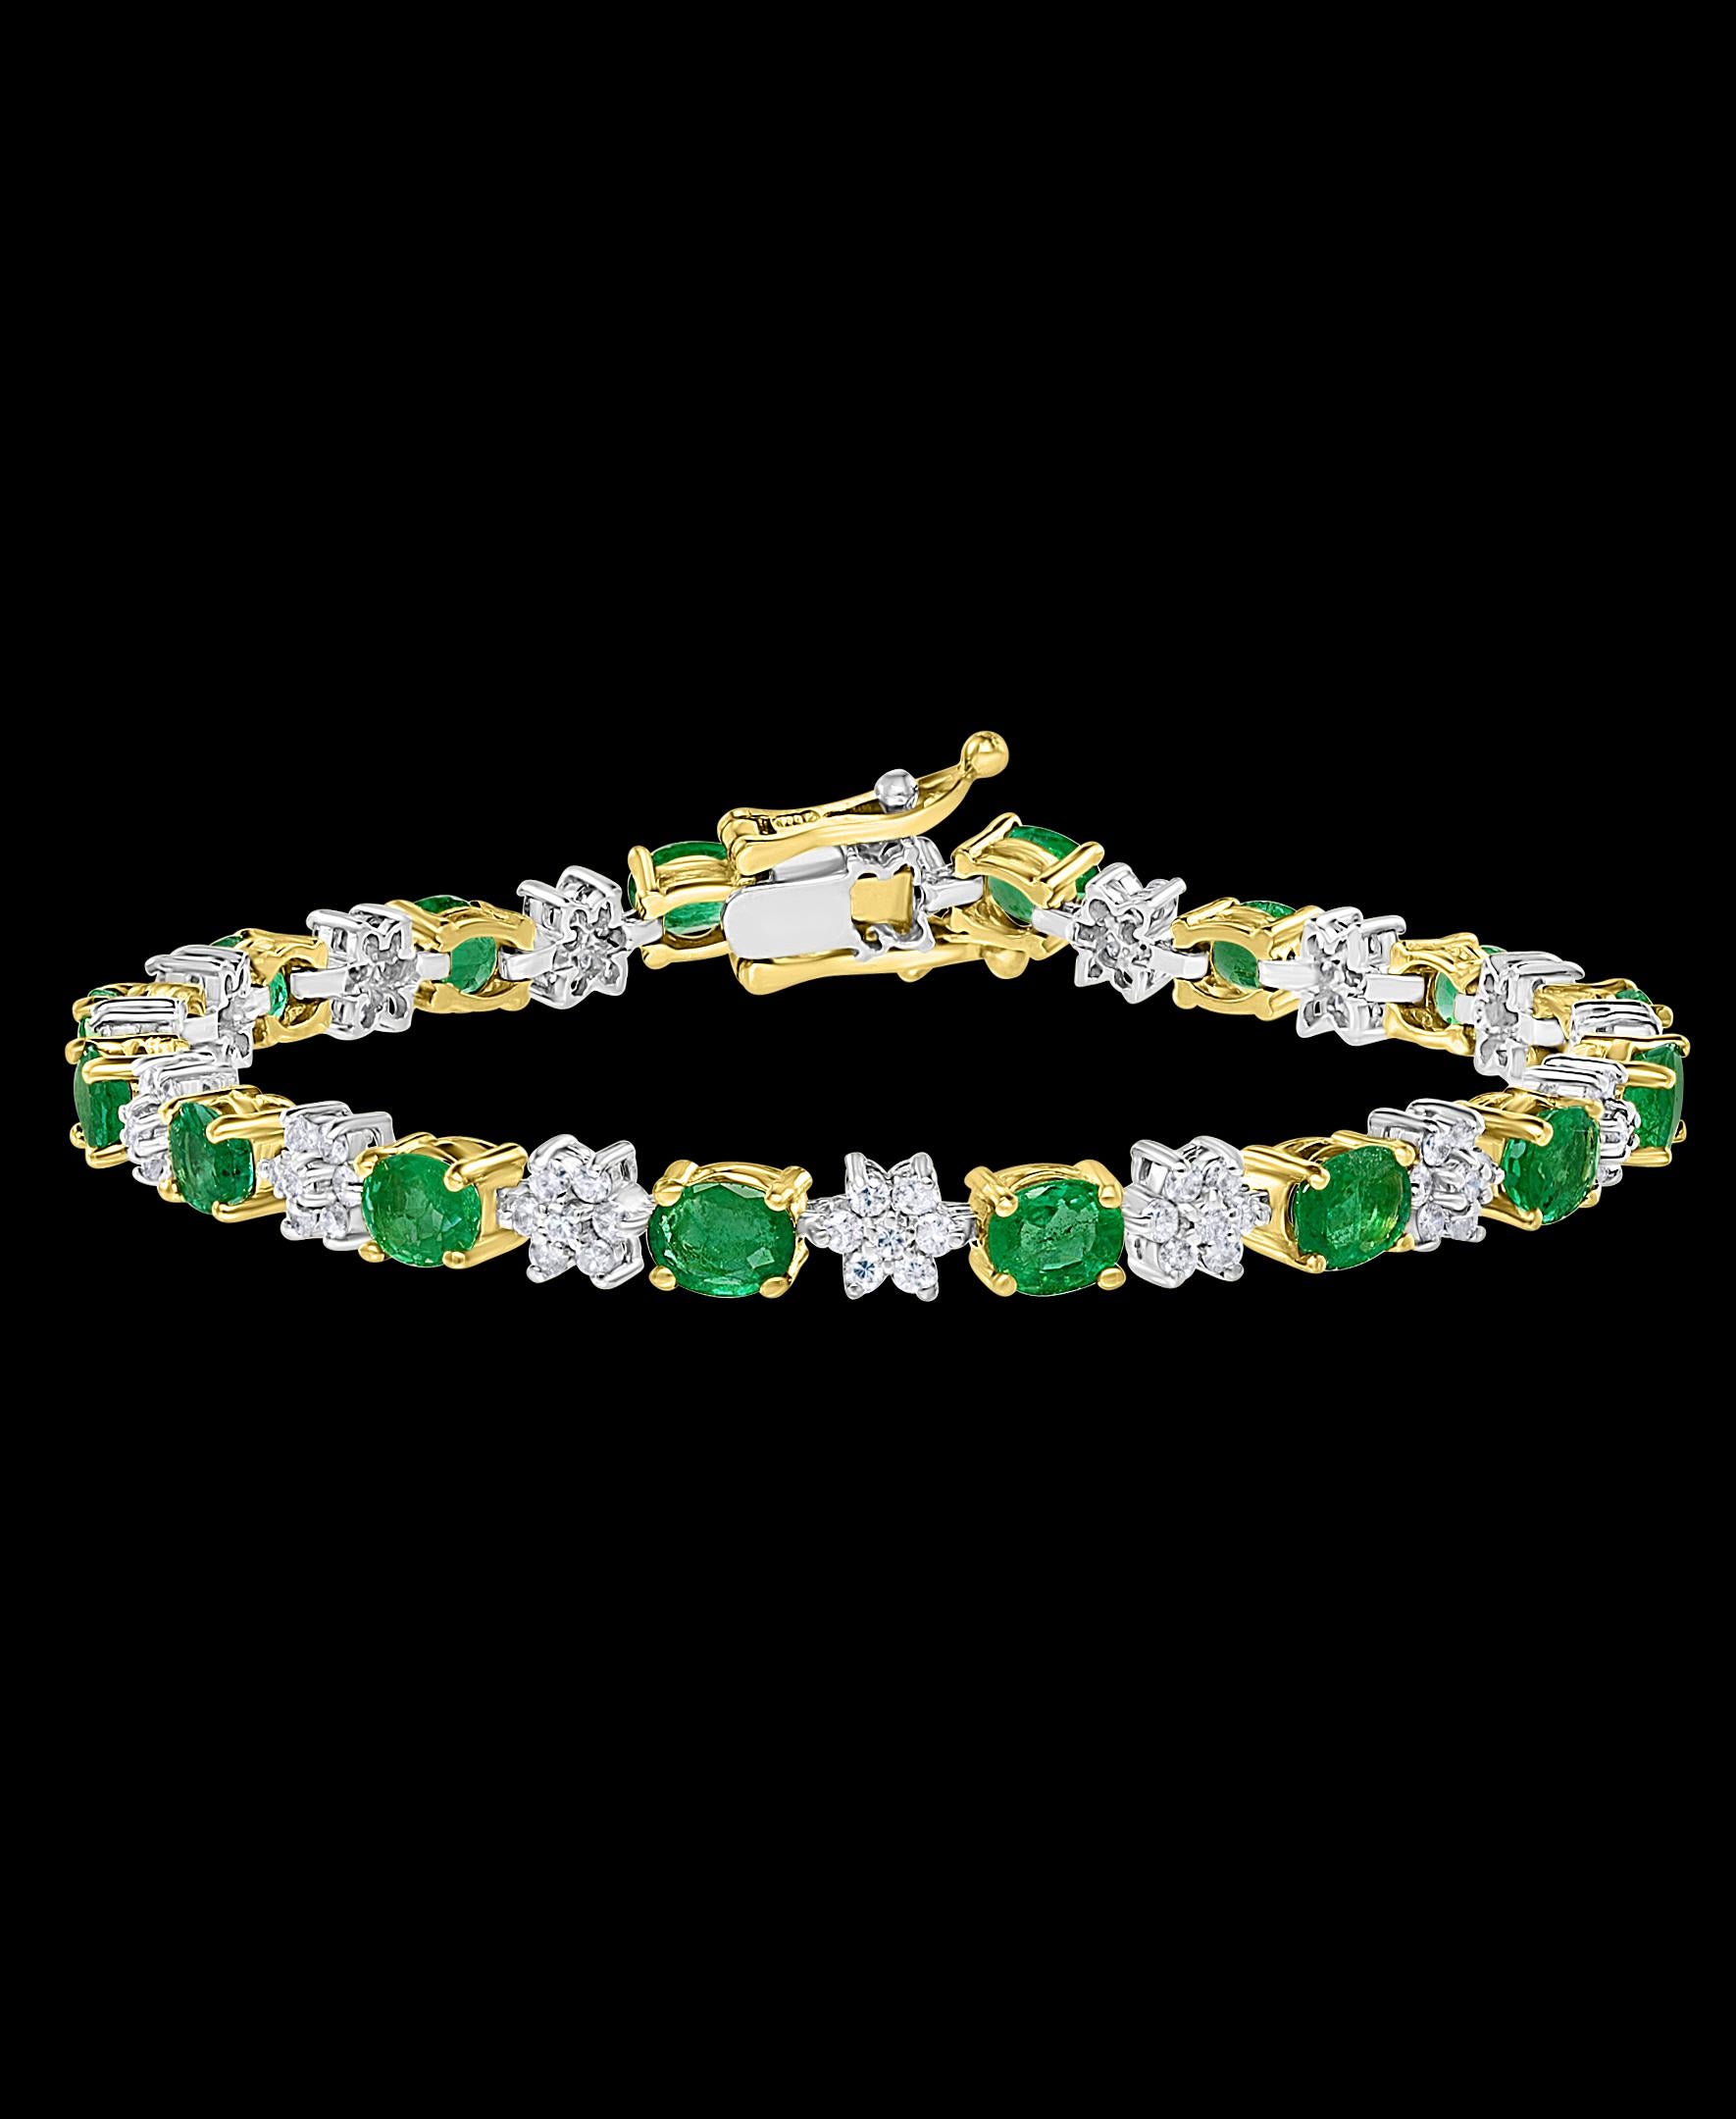  This exceptionally affordable Tennis  bracelet has  16 stones of oval  Emeralds  . Each Emerald is spaced by a diamond flower.  Each  diamond flower is made of 7 diamonds.
 Total weight of Emerald is 5.0 carat. Total number of  diamonds is 112,